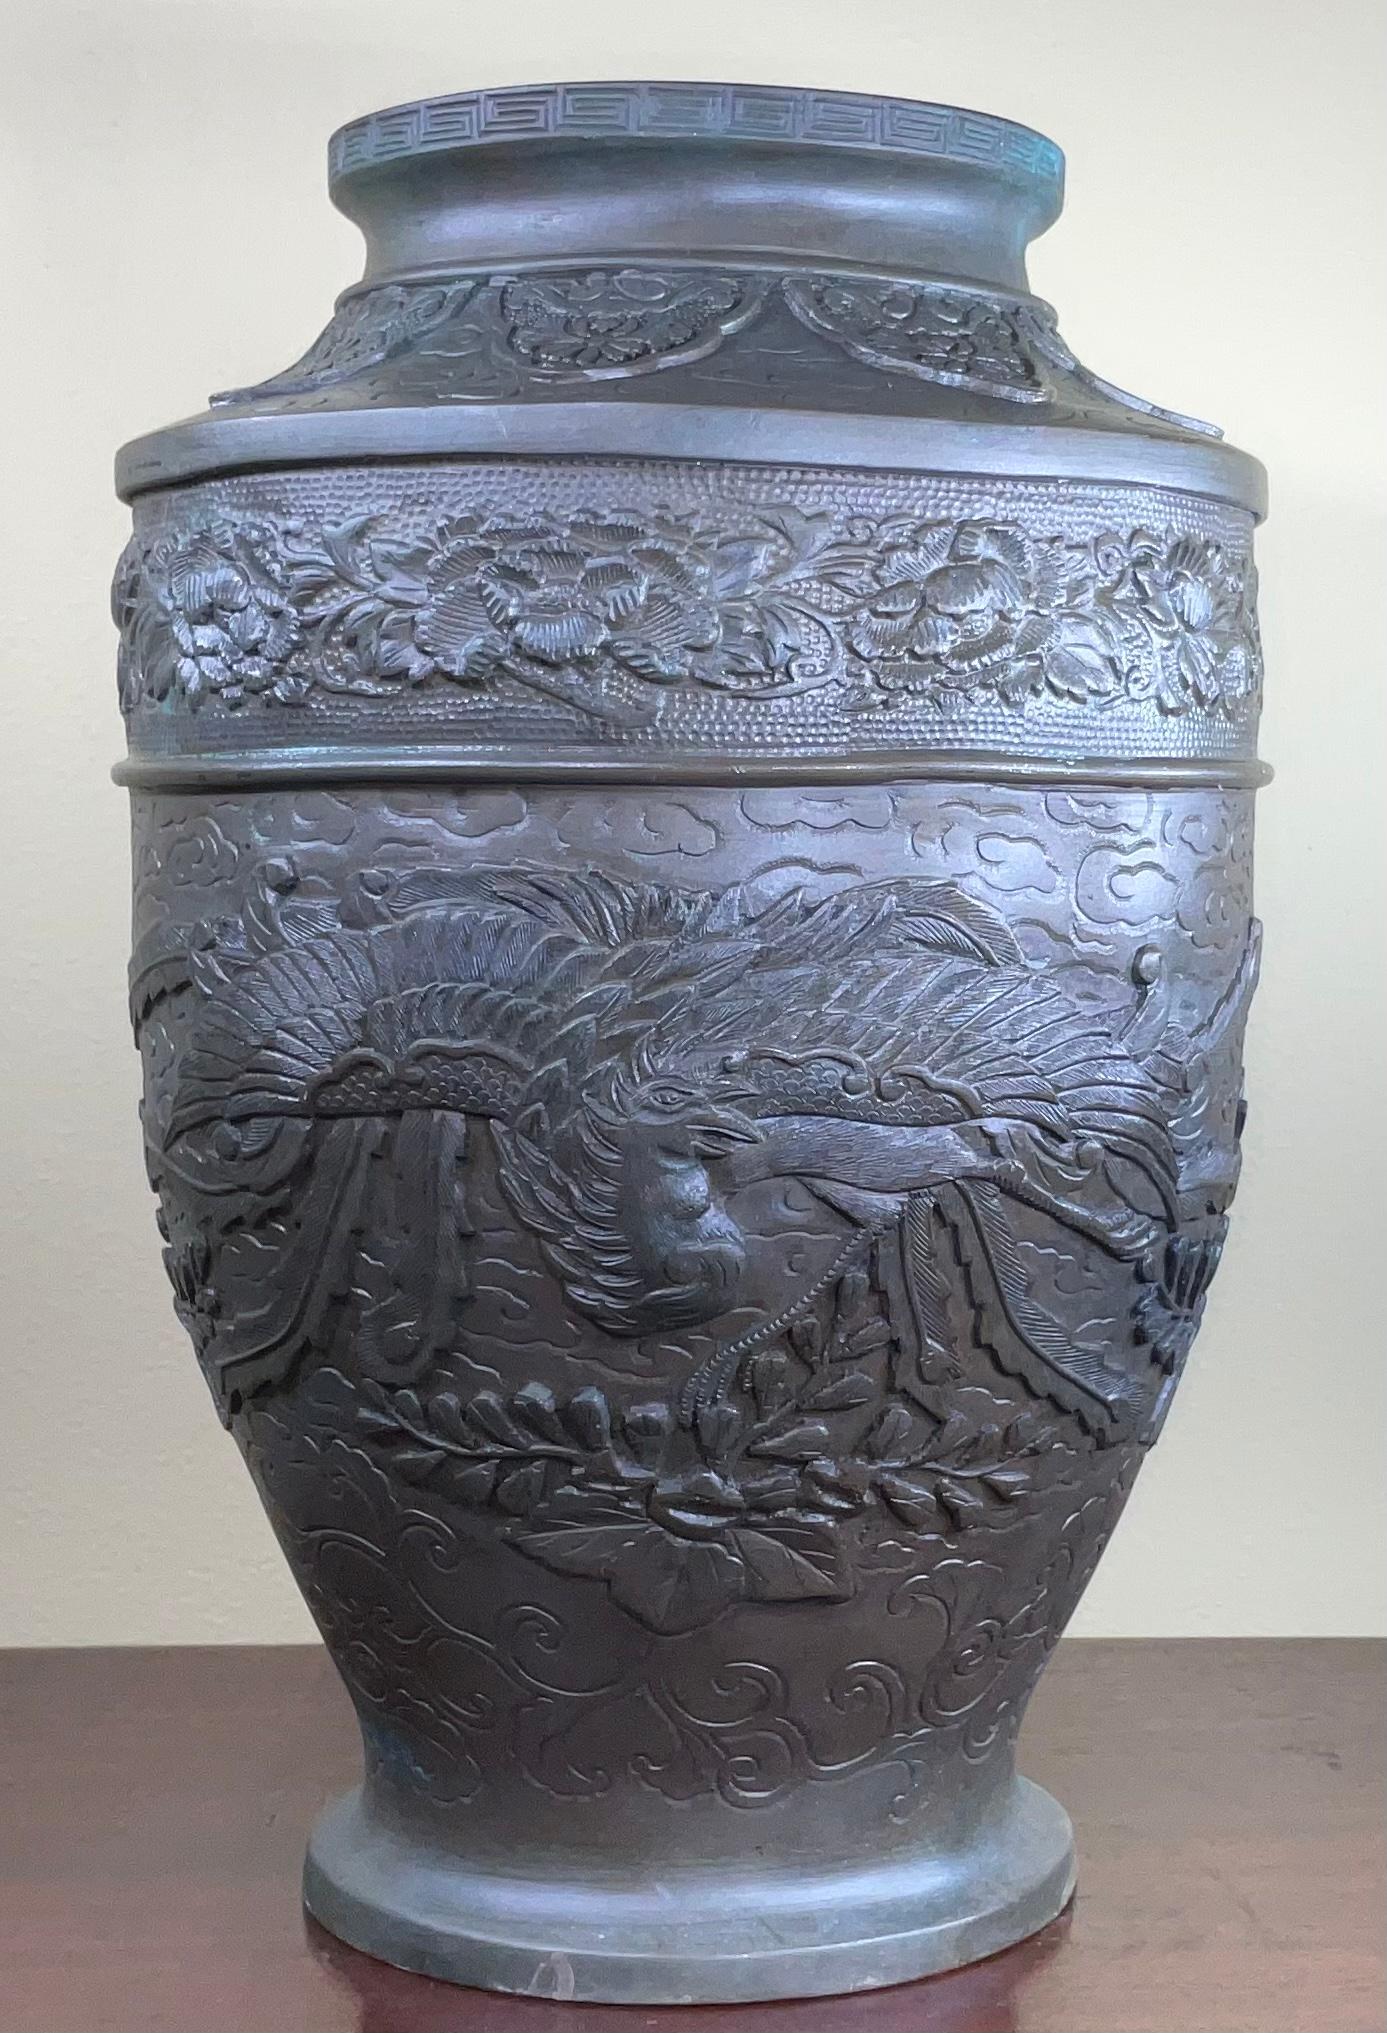 Beautiful vase made of solid bronze hand etched of floral motifs with exceptional bird spreading its wings.
The vase can not hold water (two holes on the bottom)
Signature mark on the bottom.